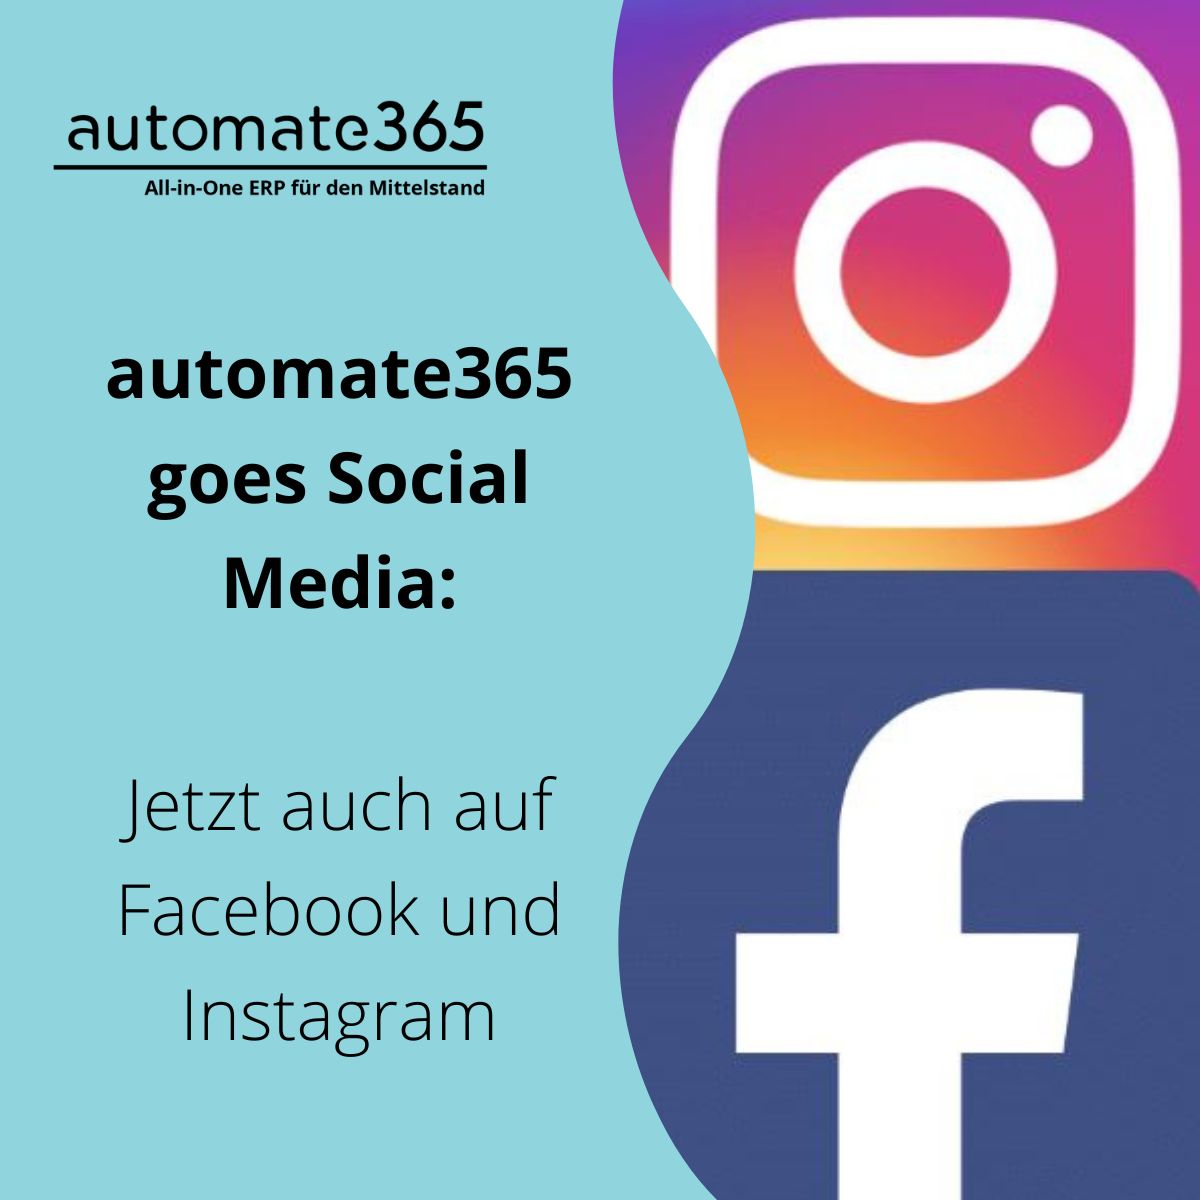 Automate365 goes Social Media